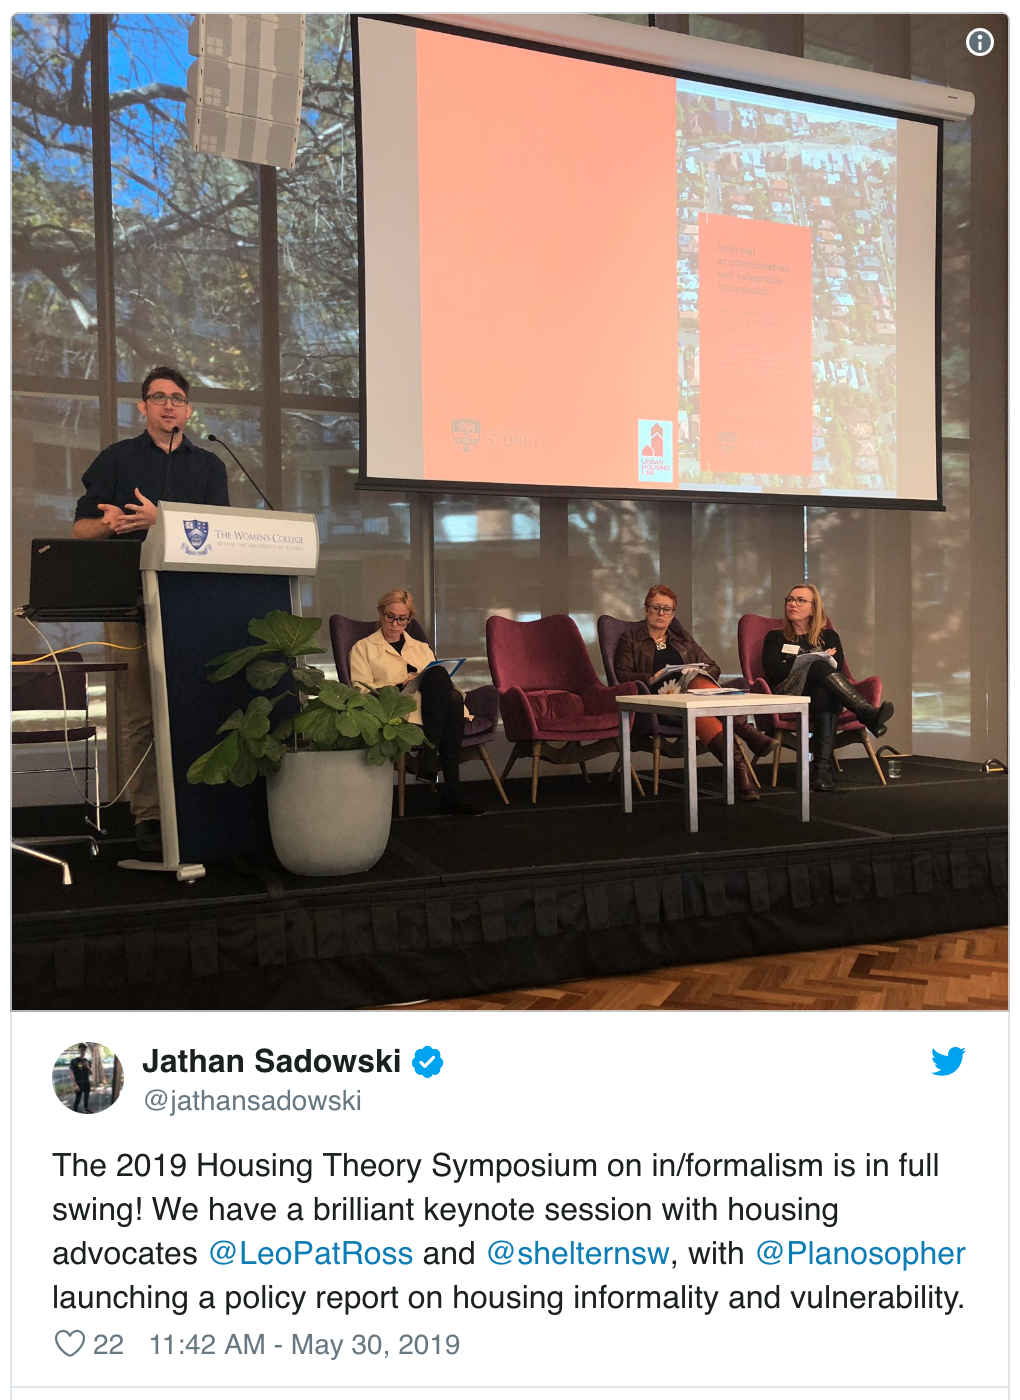 The 2019 Housing Theory Symposium on in/formalism is in full swing! We have a brilliant keynote session with housing advocates @LeoPatRoss and @shelternsw, with @Planosopher launching a policy report on housing informality and vulnerability.  — Jathan Sadowski (@jathansadowski) May 30, 2019